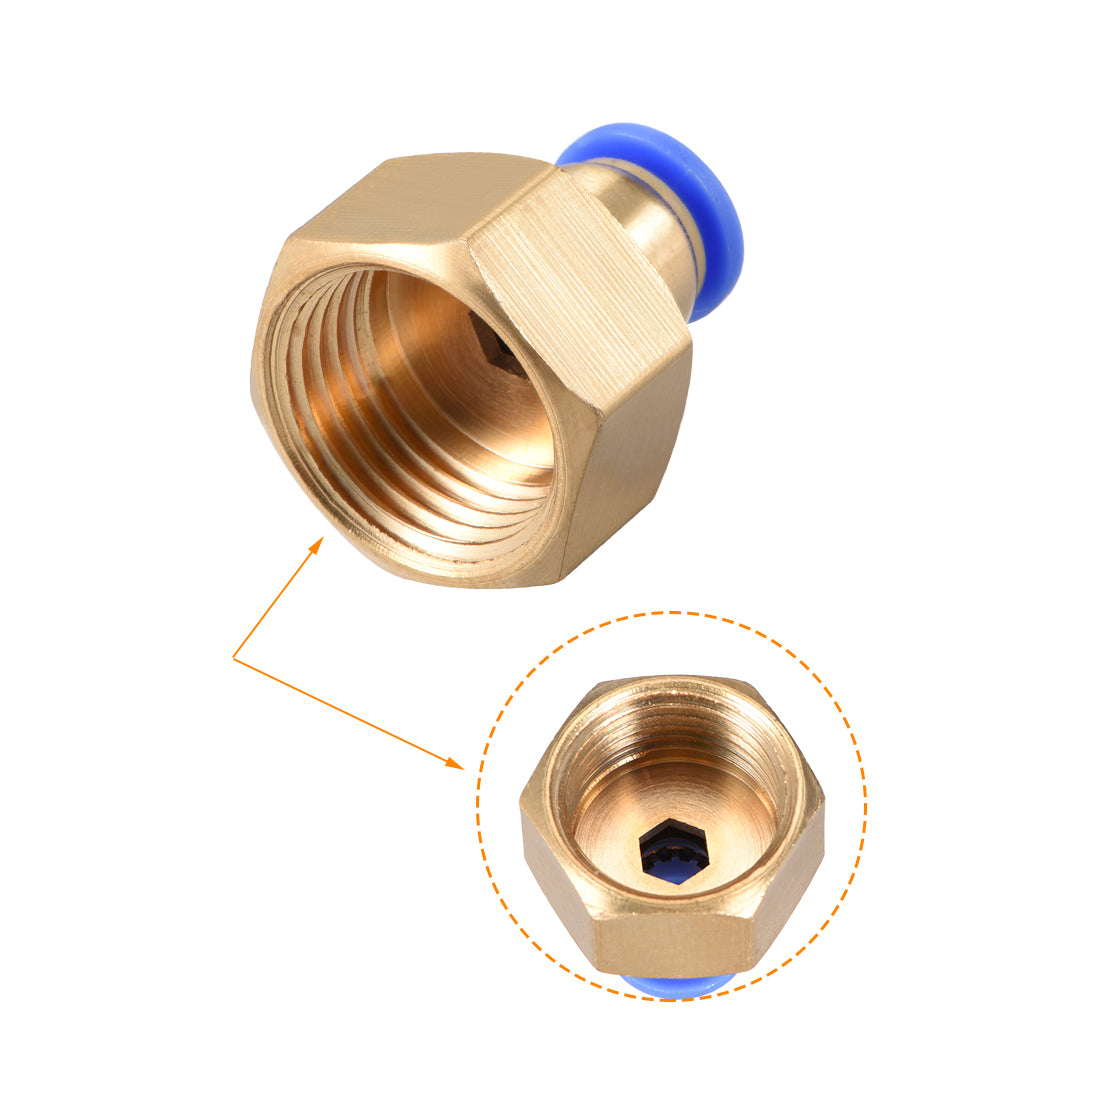 uxcell Uxcell Push to Connect Tube Fitting Adapter 8mm OD x G1/2" Female